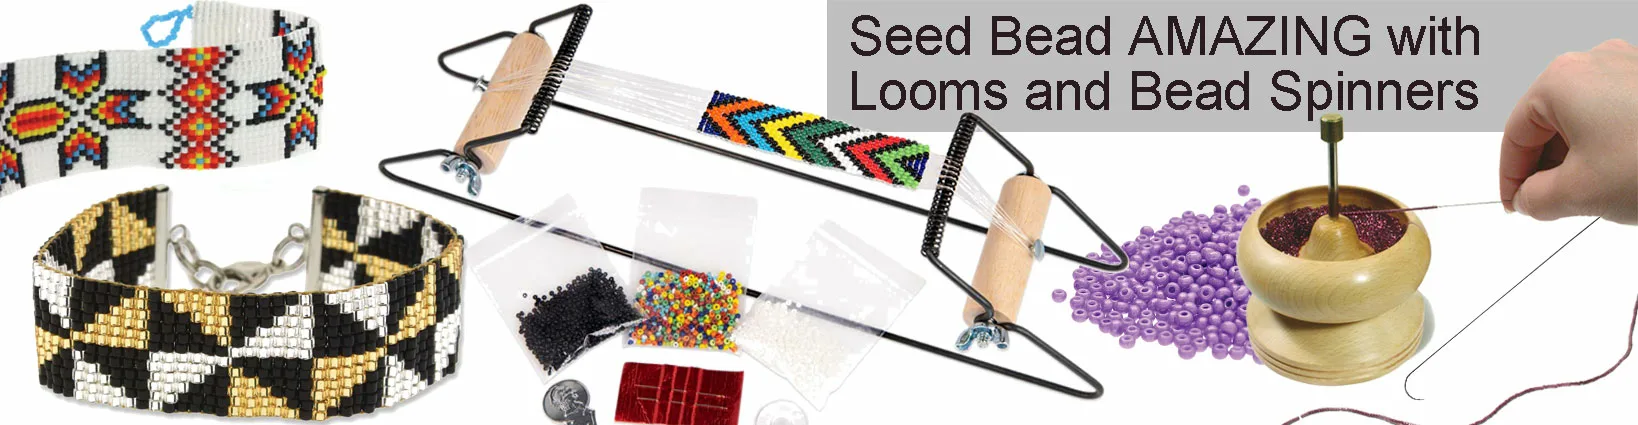 How to Use an Electric Bead Spinner  Beaded Bracelets for Beginners 